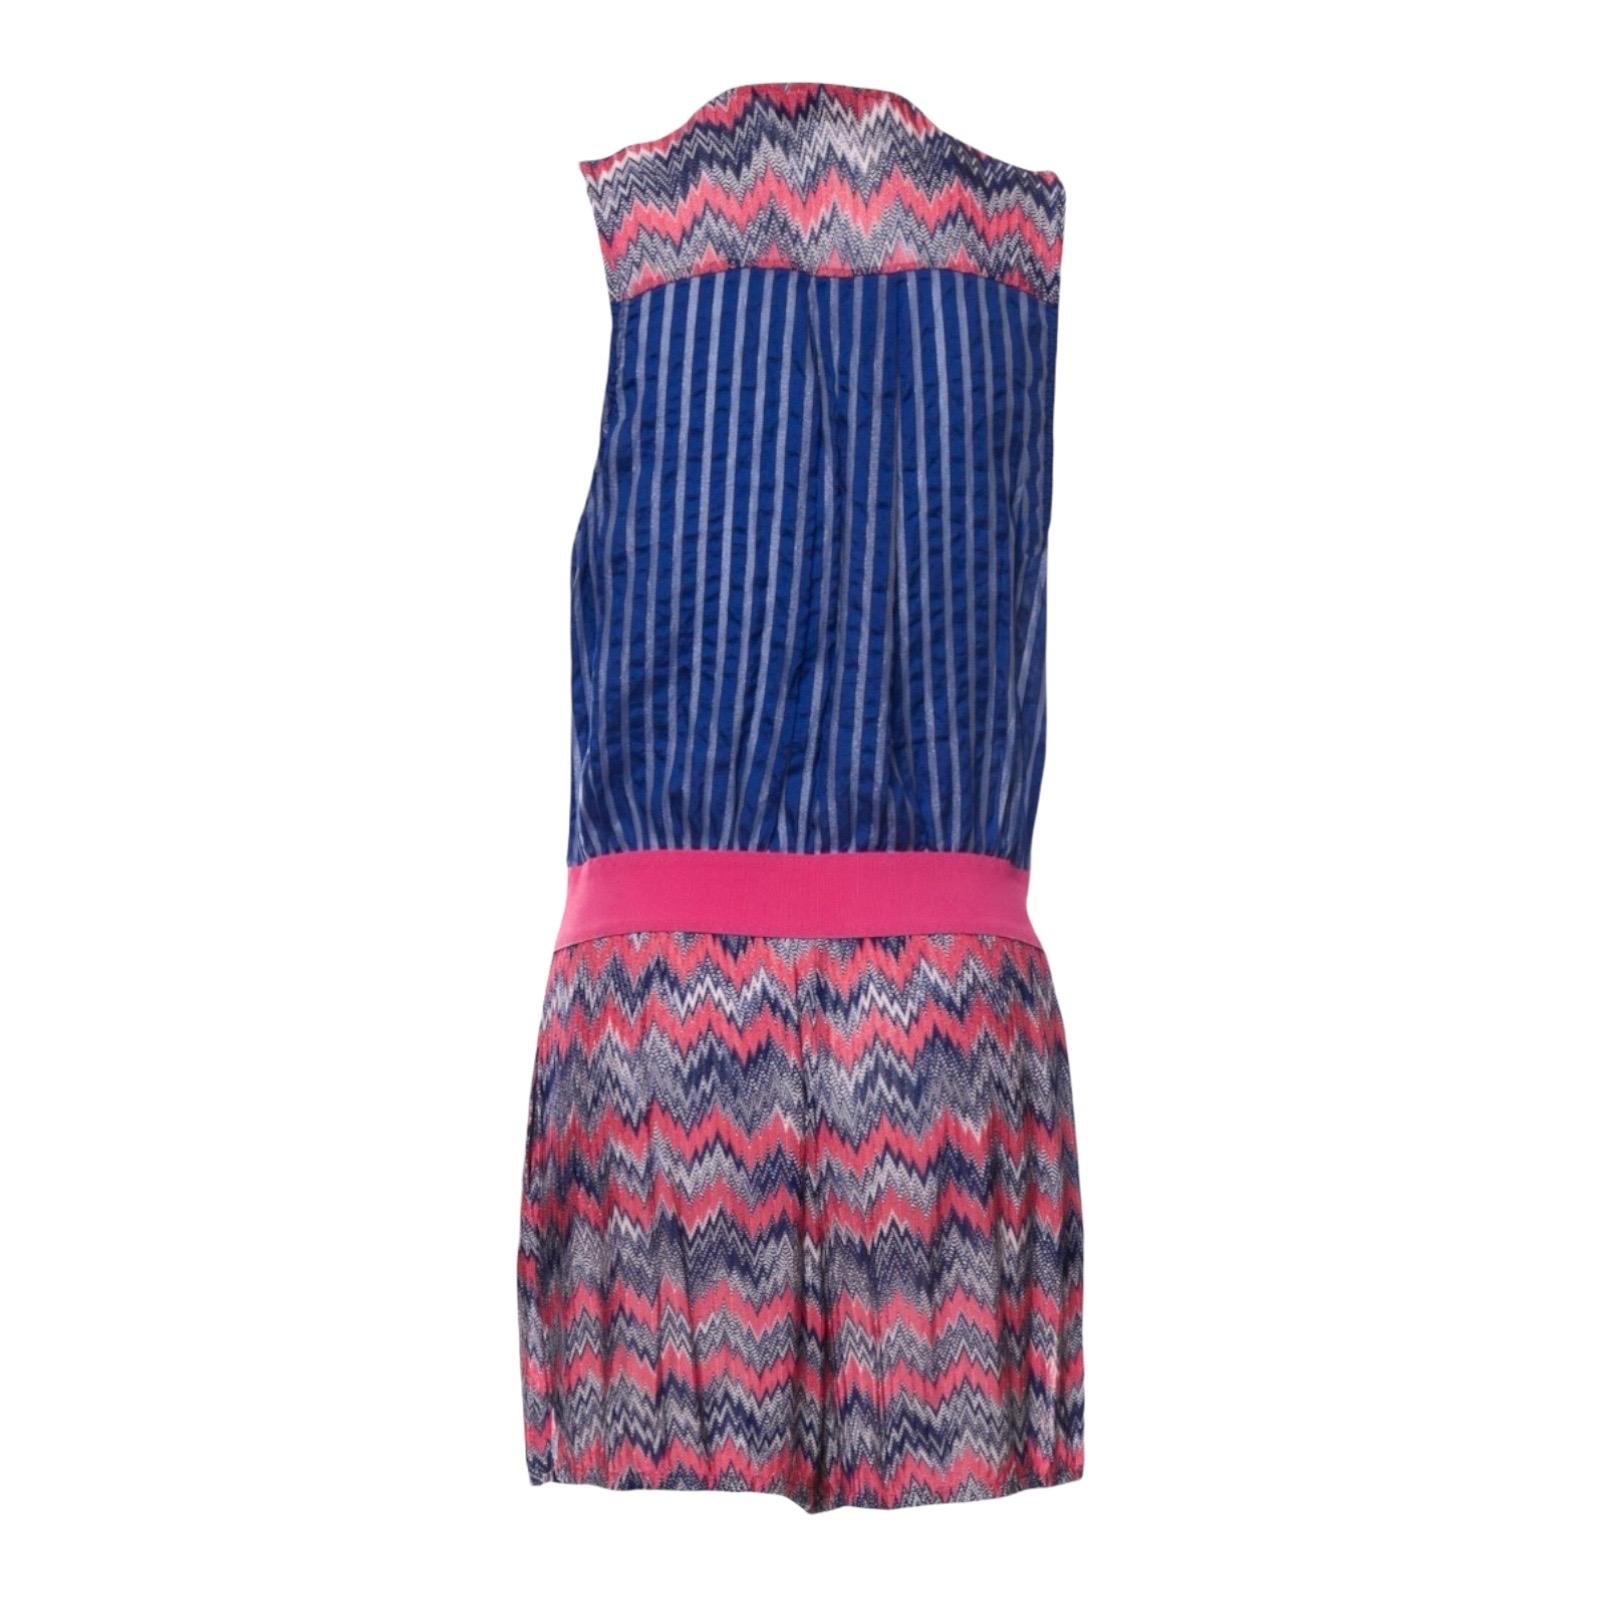 Designed by Missoni in its signature weave pattern, this playsuit is too stylish to resist! 
It comes with a pink and blue striped top with buttoned front. It features a round neckline and sleeveless arms. The shorts are accented with a pink